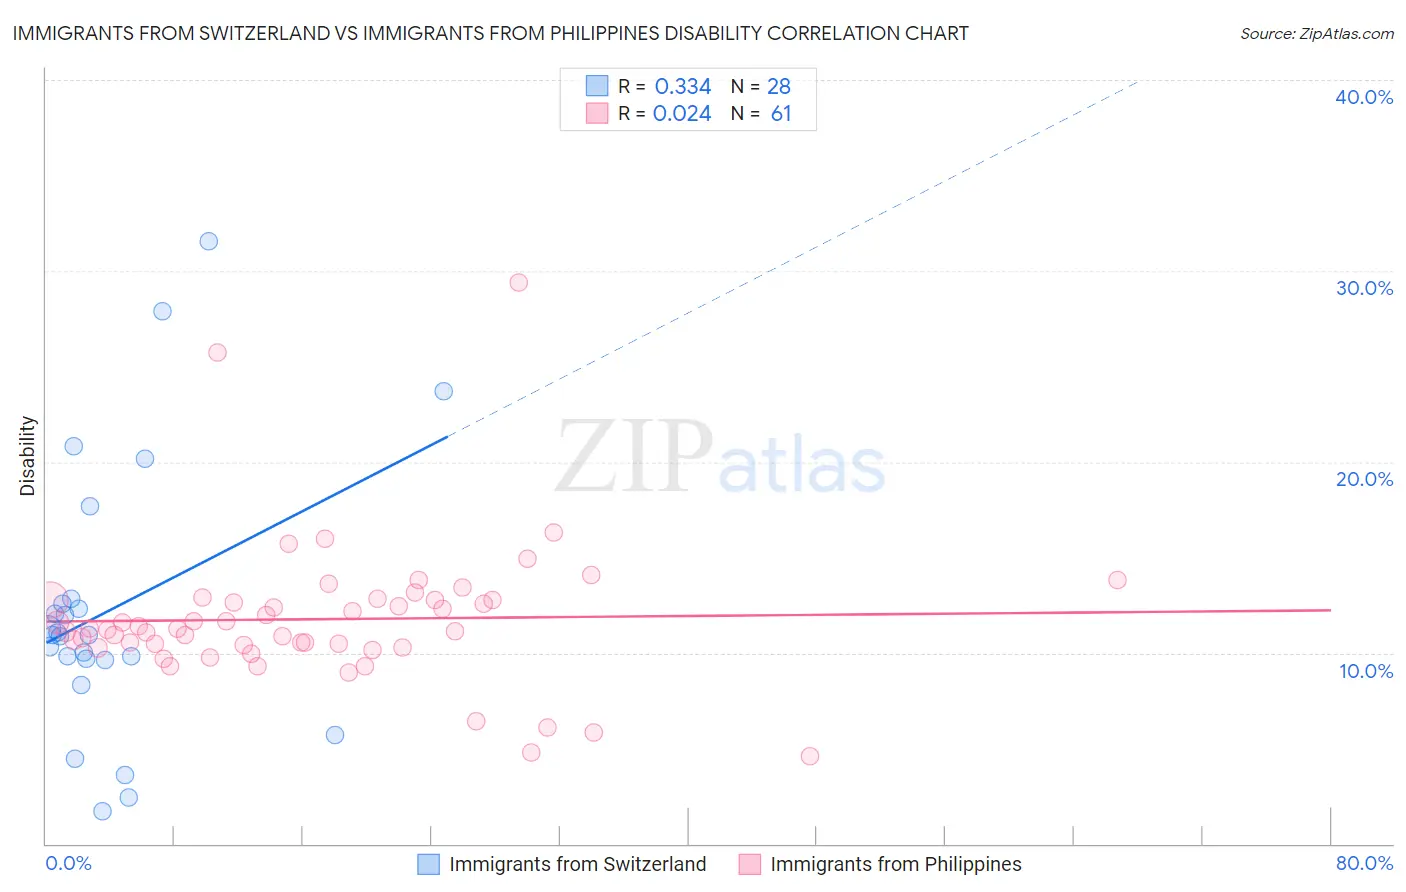 Immigrants from Switzerland vs Immigrants from Philippines Disability